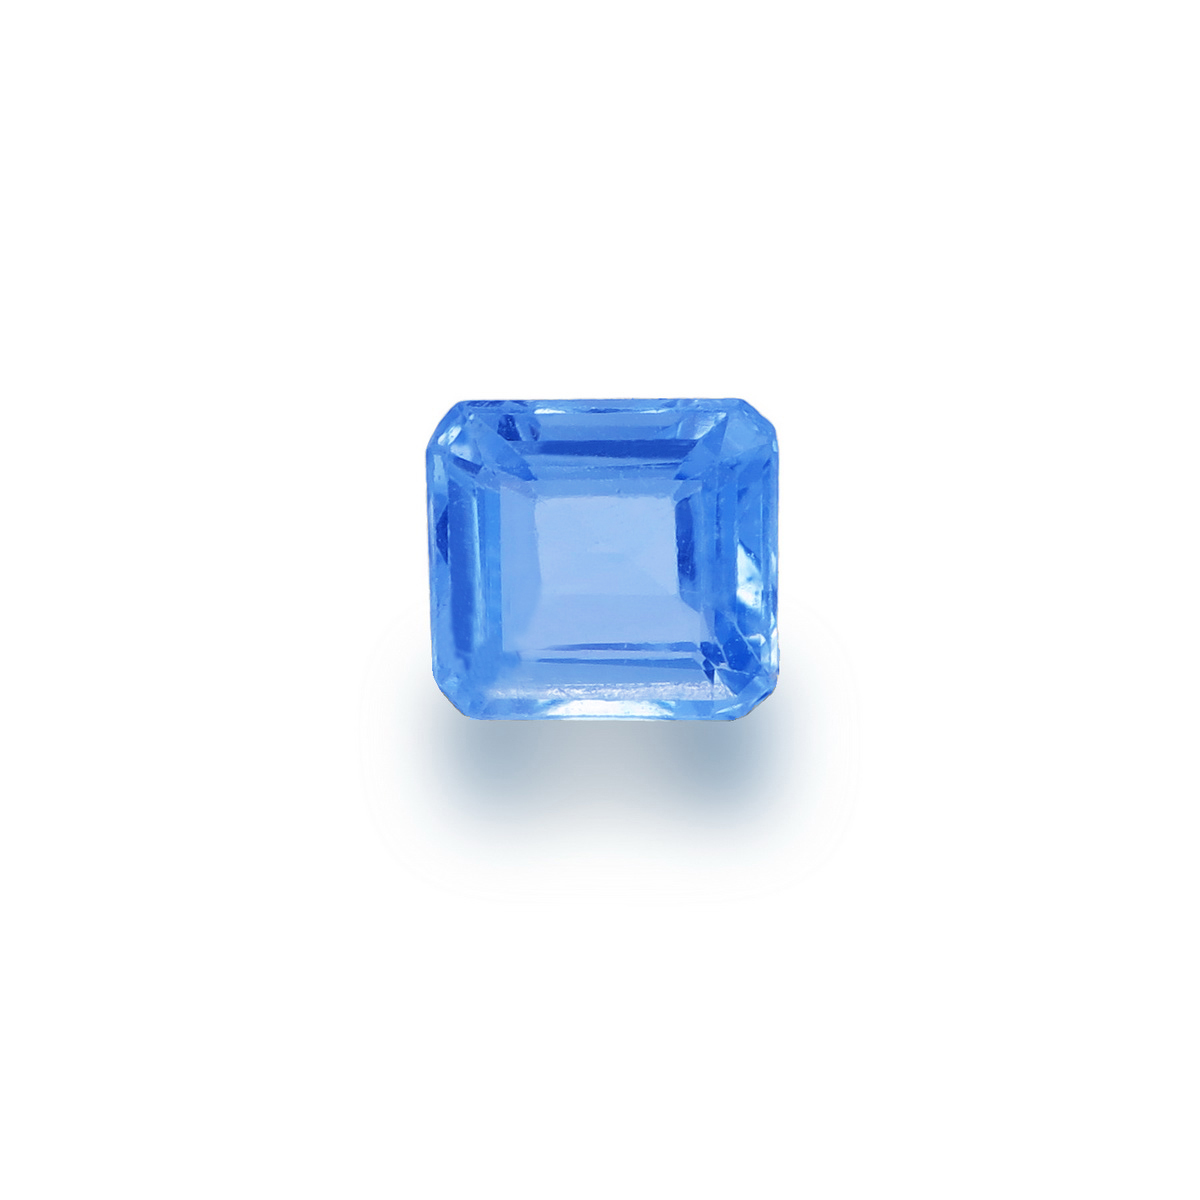 Untreated electric light blue, good luster, emerald cut, .72ct.